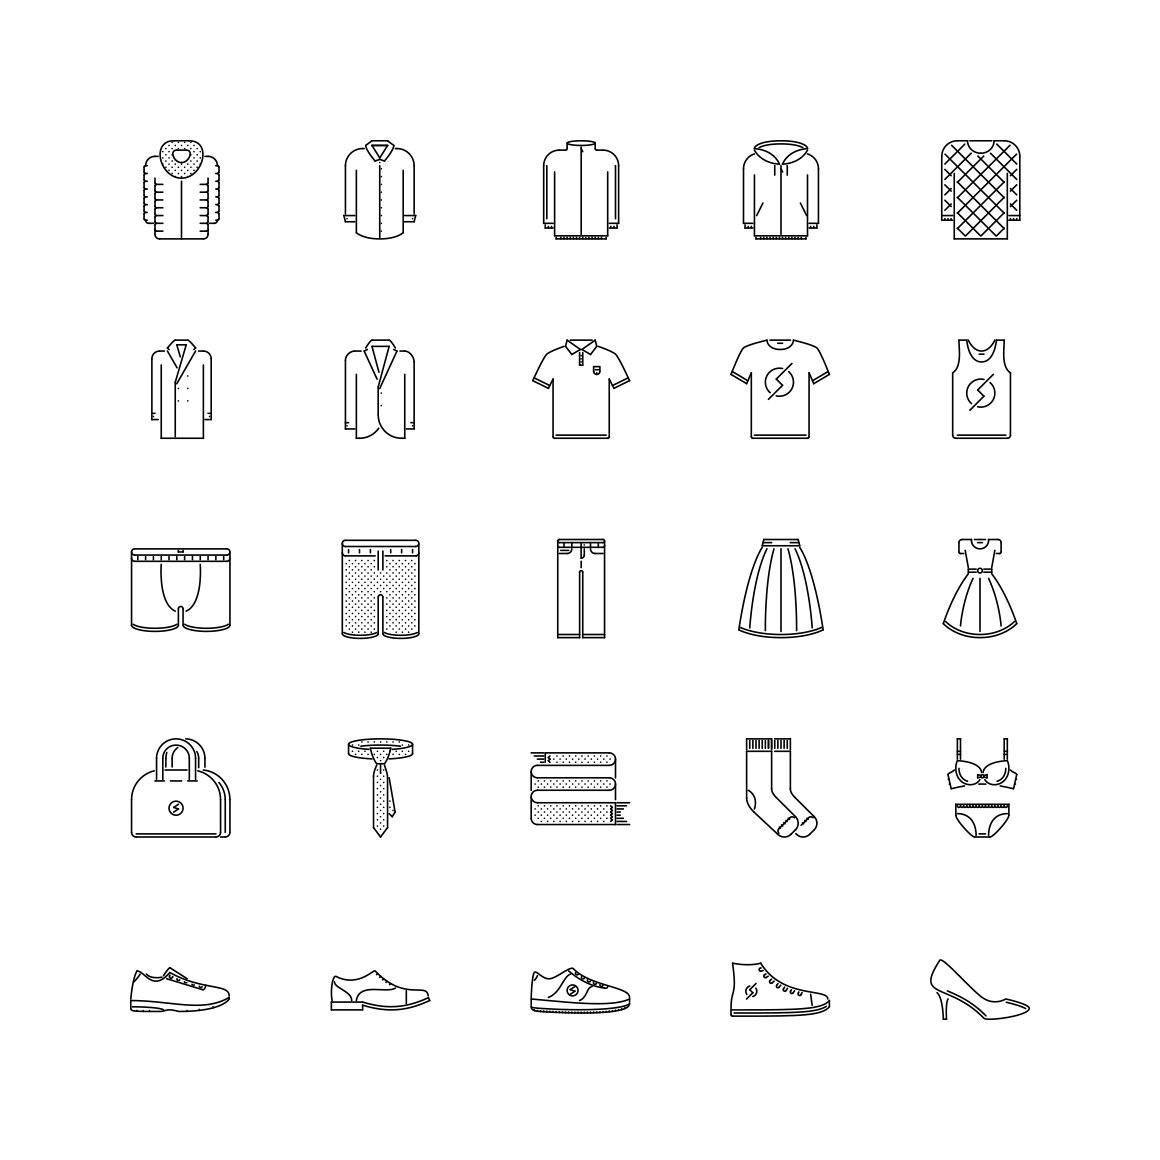 The Clothes Outline Icons 25 preview image.